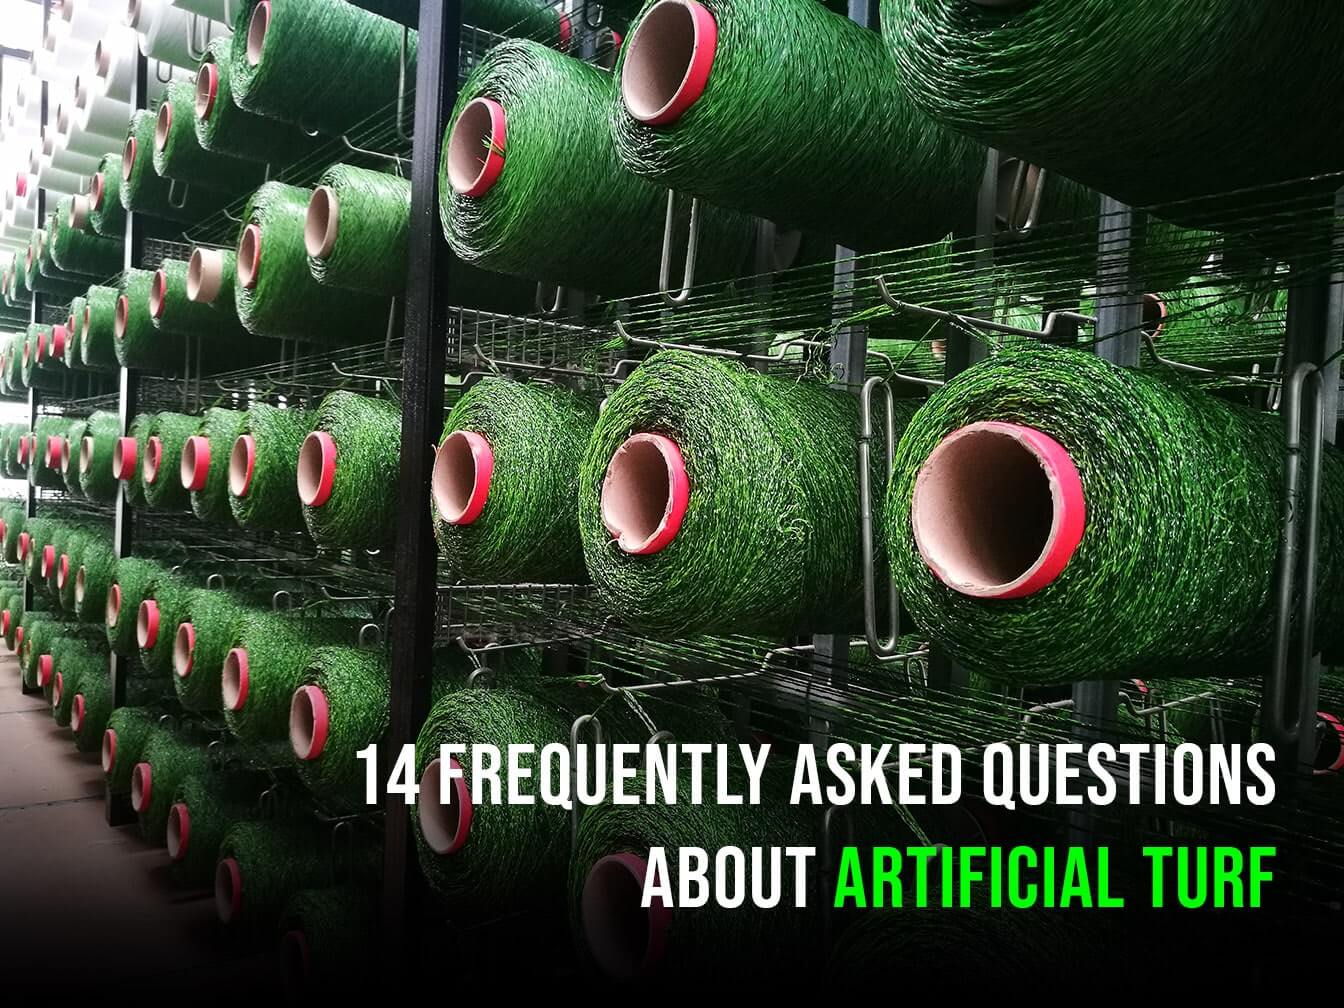 14 Frequently Asked Questions about Artificial Turf-boston-min